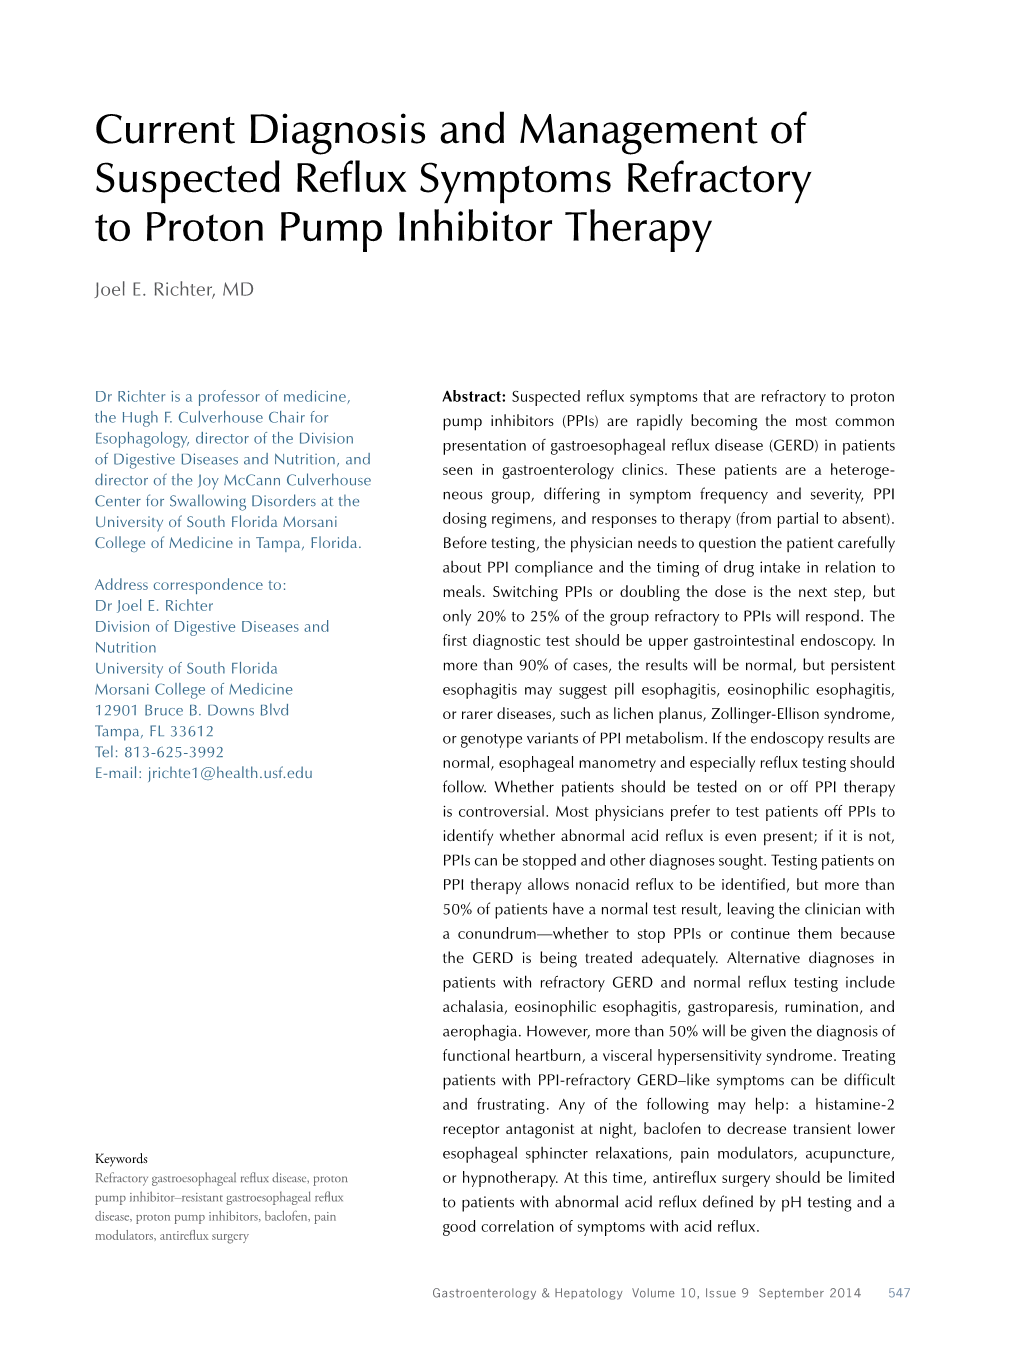 Current Diagnosis and Management of Suspected Reflux Symptoms Refractory to Proton Pump Inhibitor Therapy